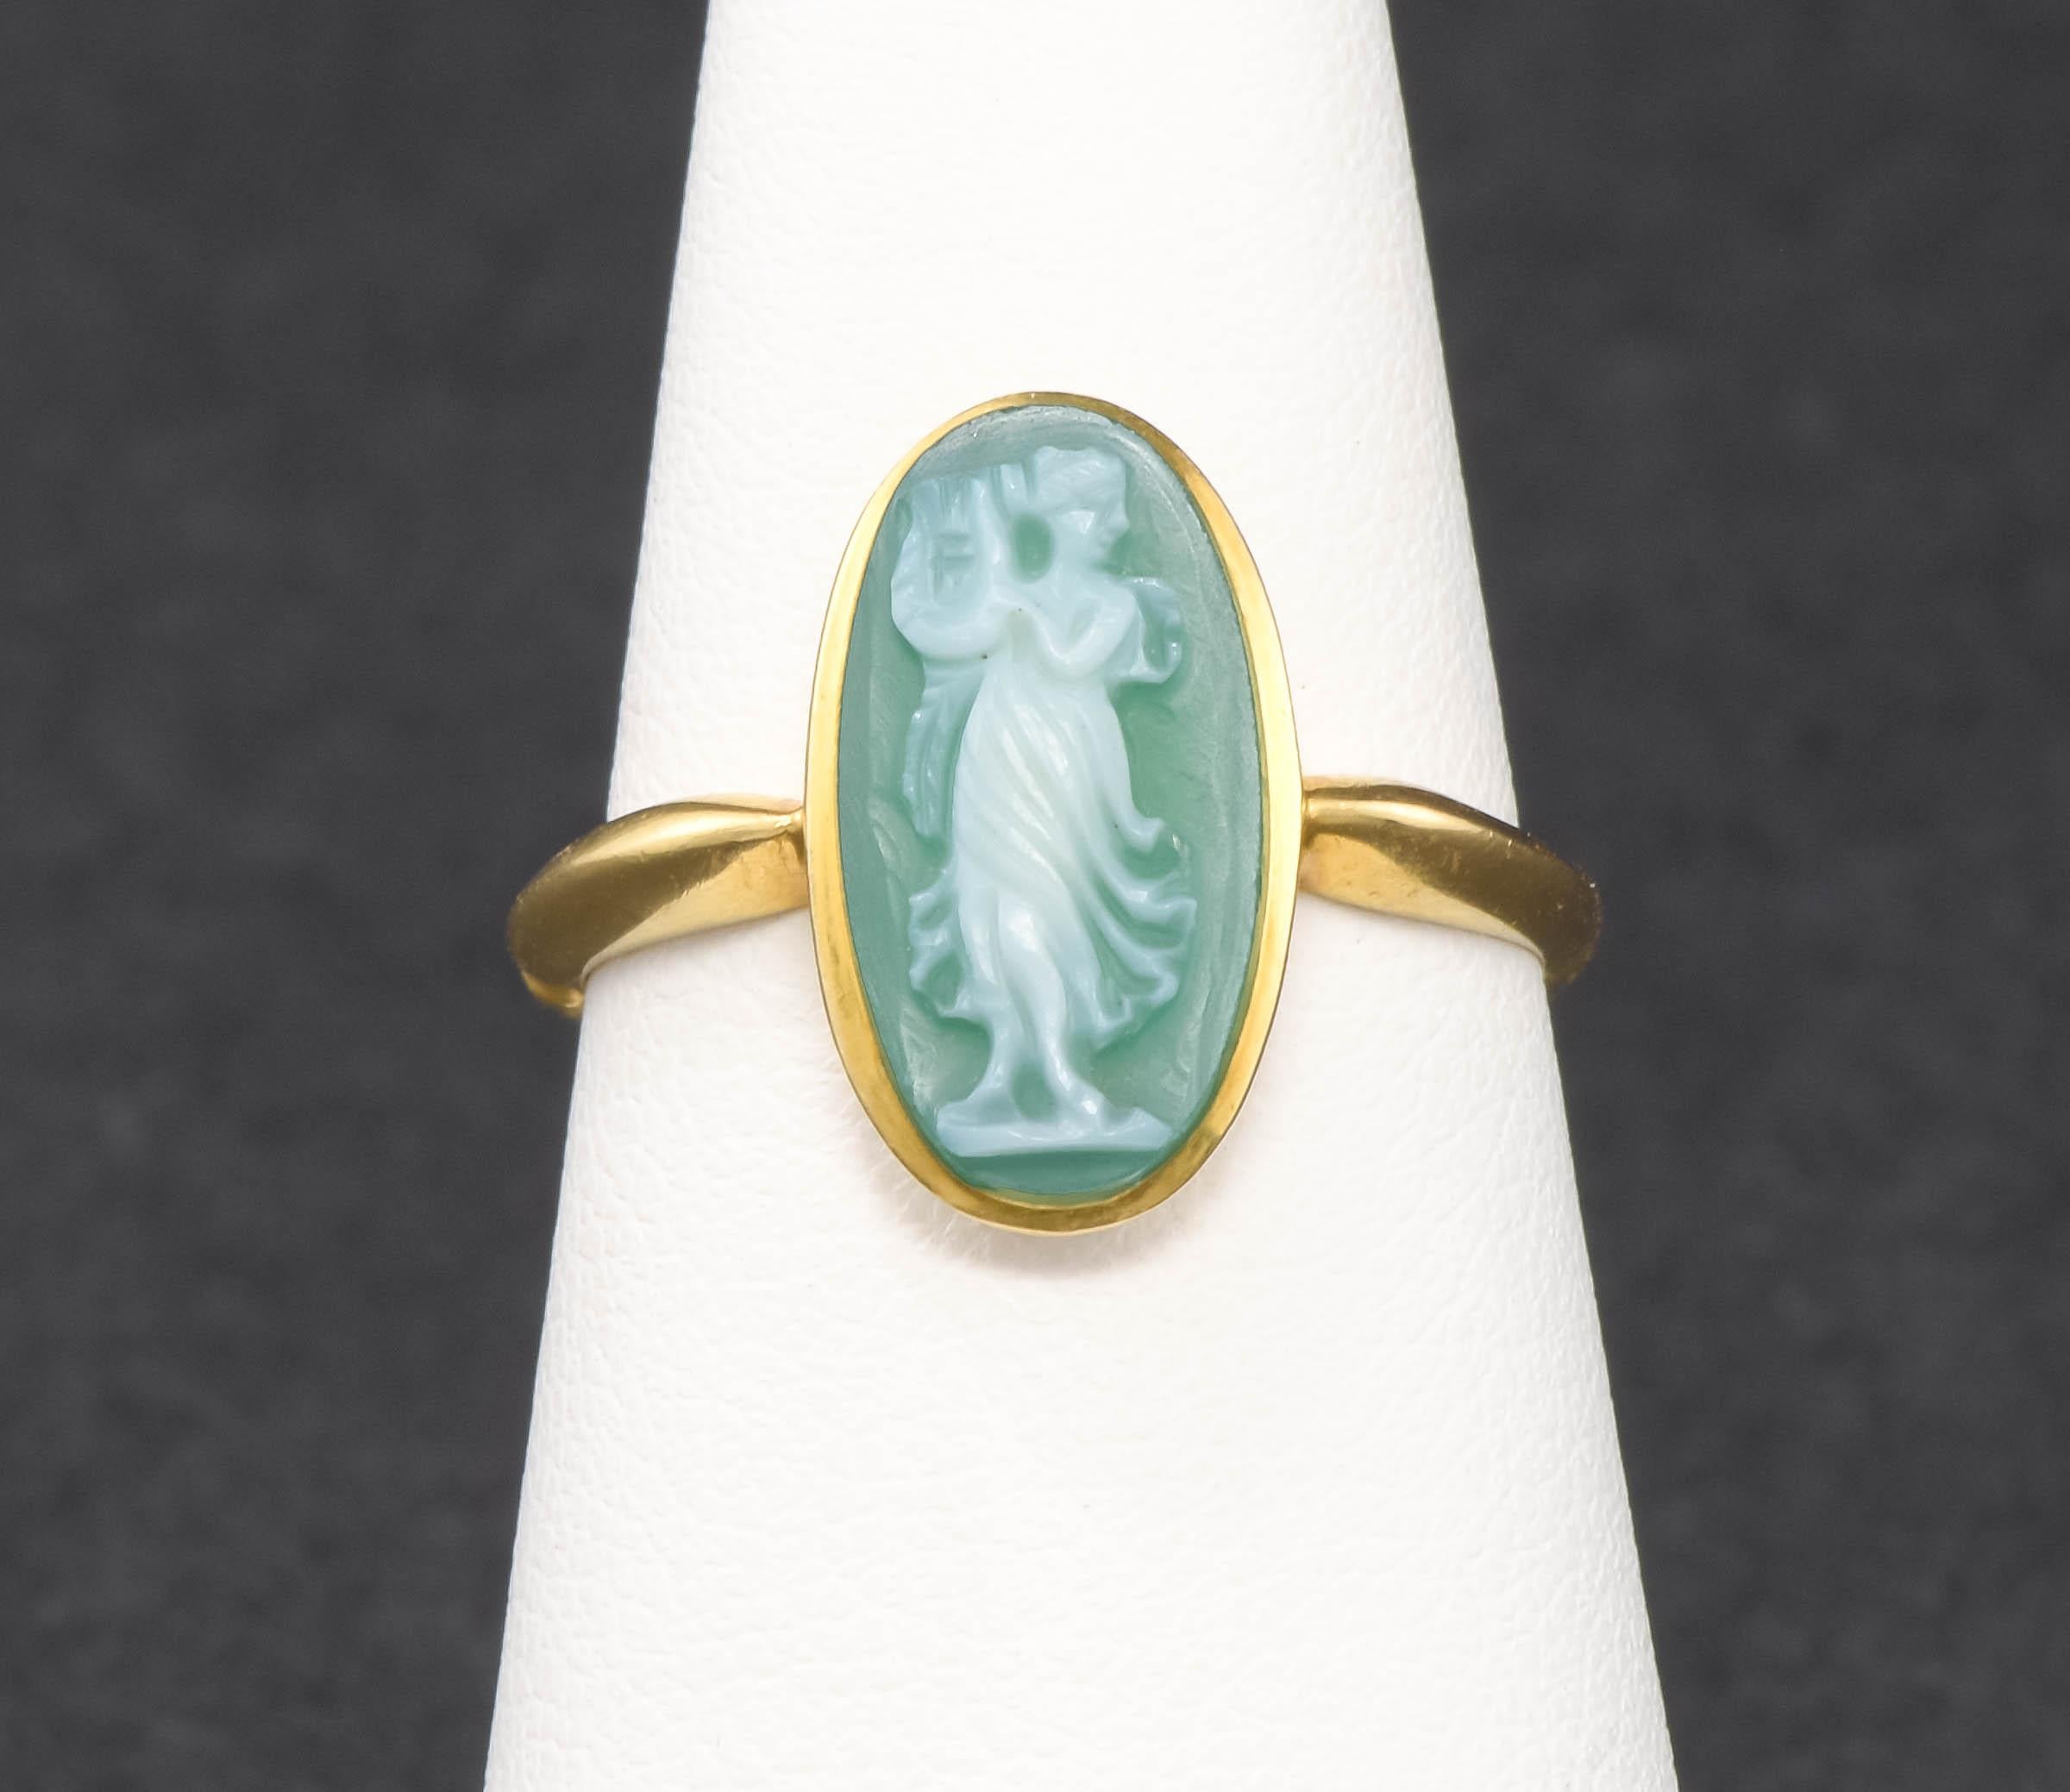 Women's Carved Green Chalcedony Cameo Ring in 18K Gold, Hallmarked Chester 1909